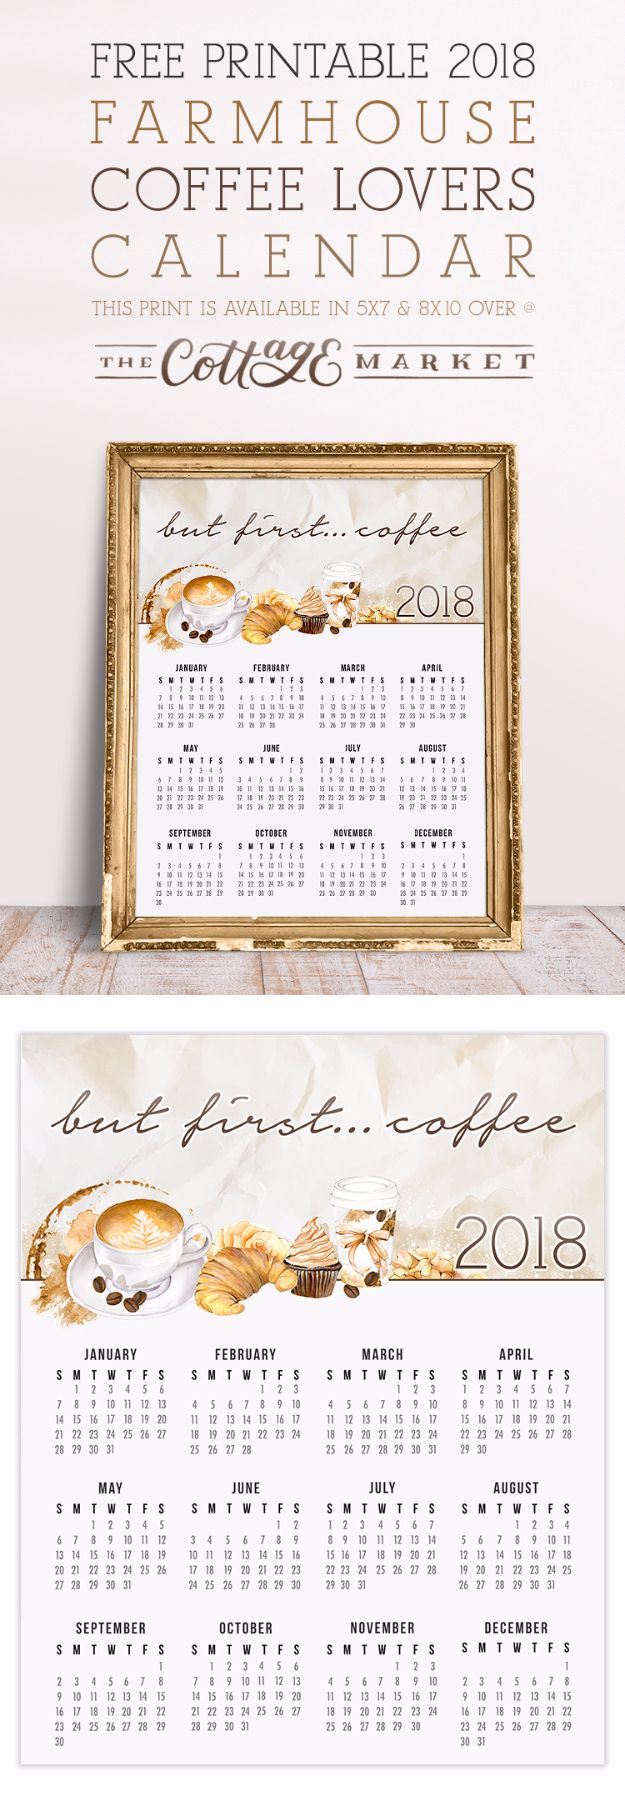 DIY Ideas for The Coffee Lover - Farmhouse Coffee Lover Calendar Free Printable - Easy and Cool Gift Ideas for People Who Love Coffee Drinks - Coaster, Cups and Mugs, Tumblers, Canisters and Do It Yourself Gift Ideas - Gift Jars and Baskets, Fun Presents to Make for Mom, Dad and Friends http://diyjoy.com/diy-ideas-coffee-lover